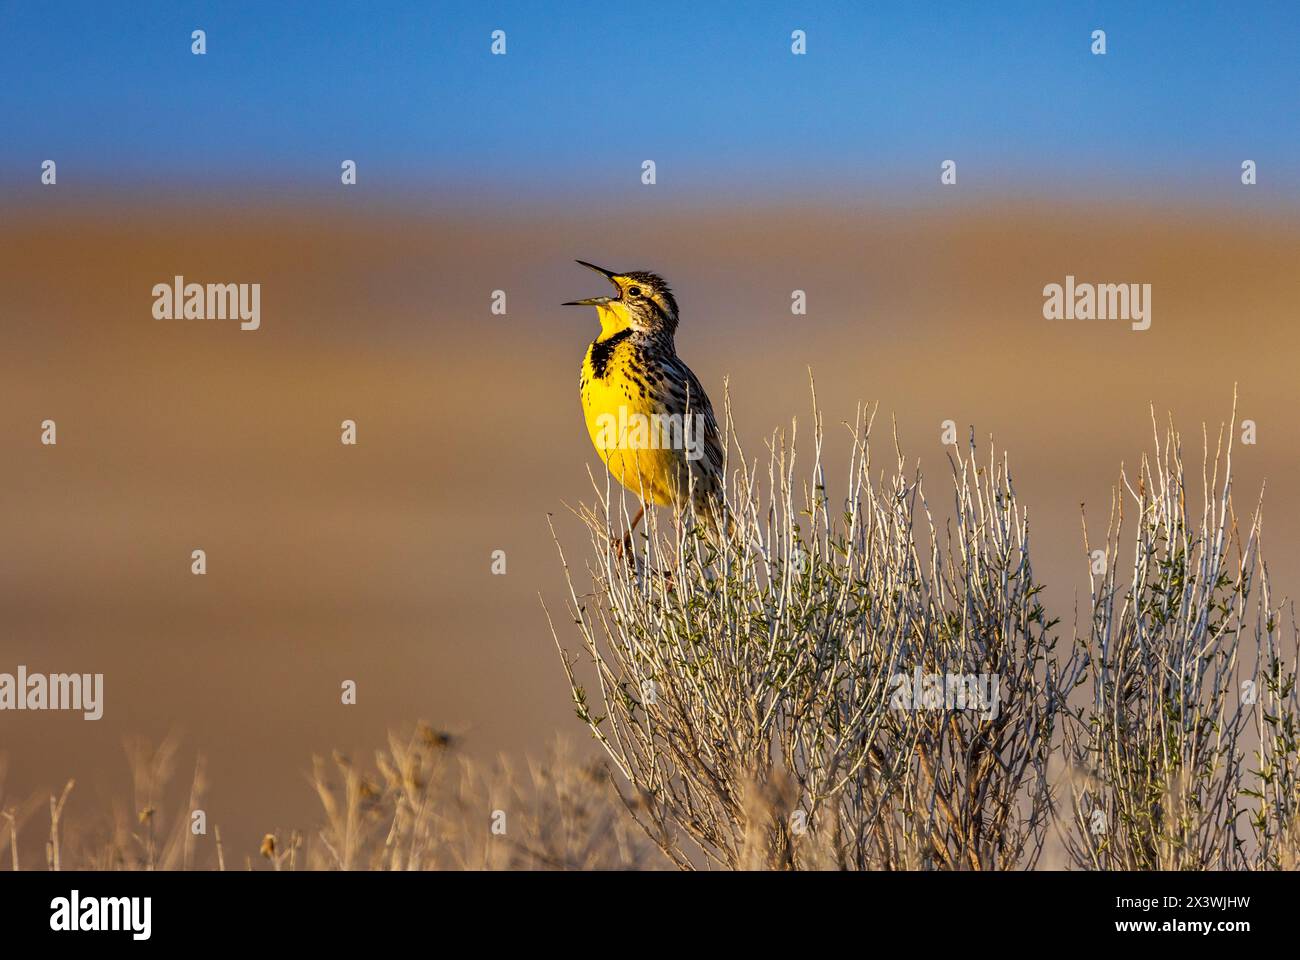 An exuberant Western Meadowlark (Sturnella neglecta) sings its springtime song from a Rabbitbrush perch on Antelope Island State Park Utah, USA. Stock Photo